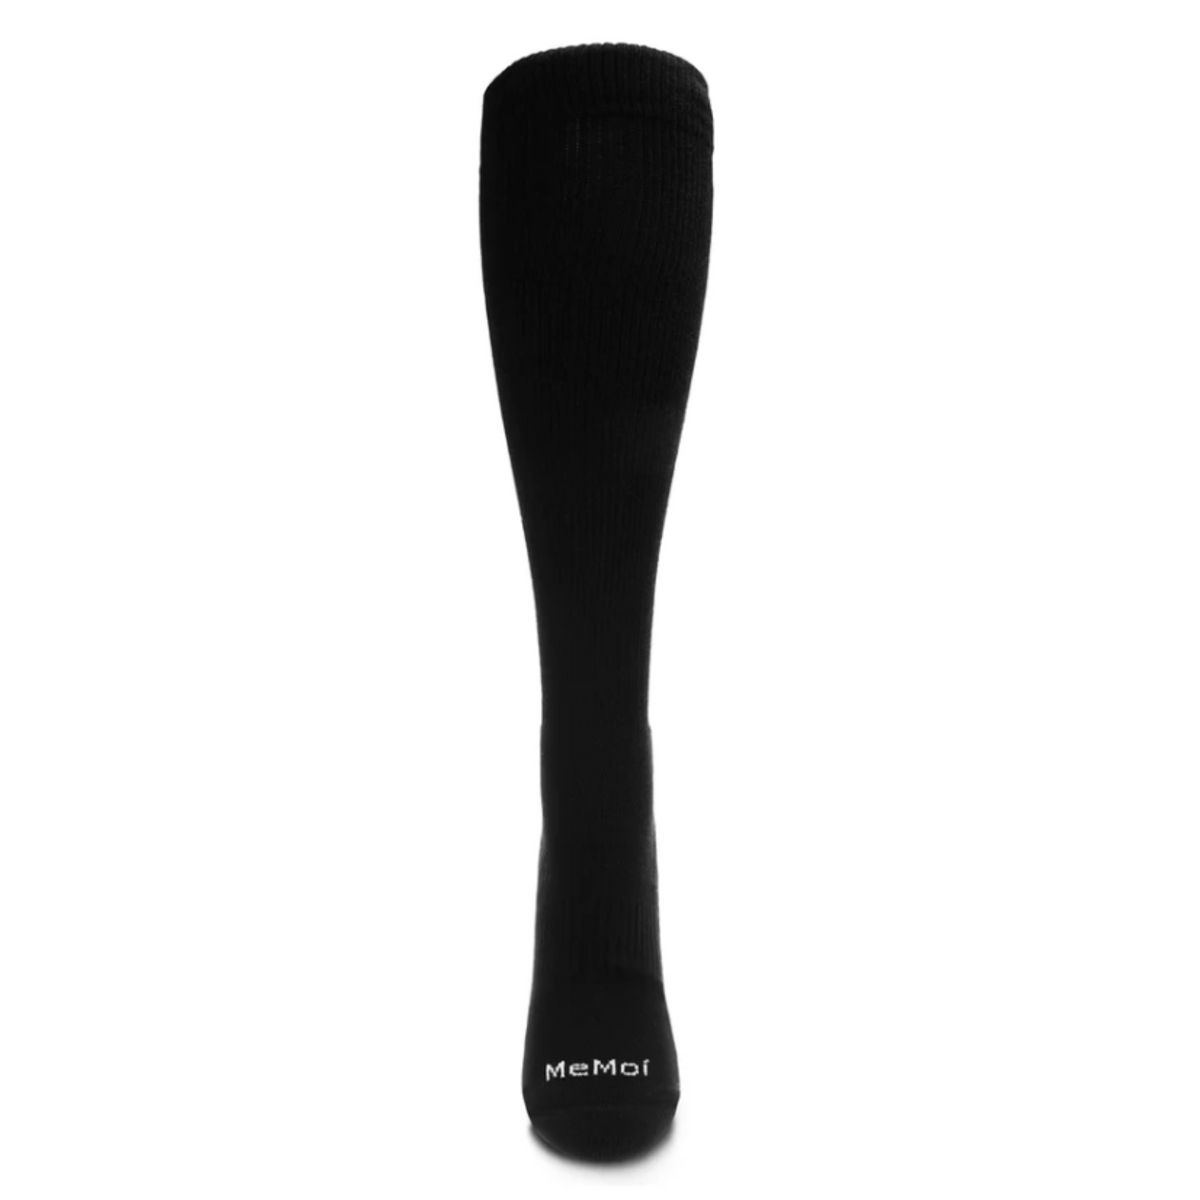 MeMoi Classic Athletic Cushion Sole Cotton Moderate Graduated Compression in black from front